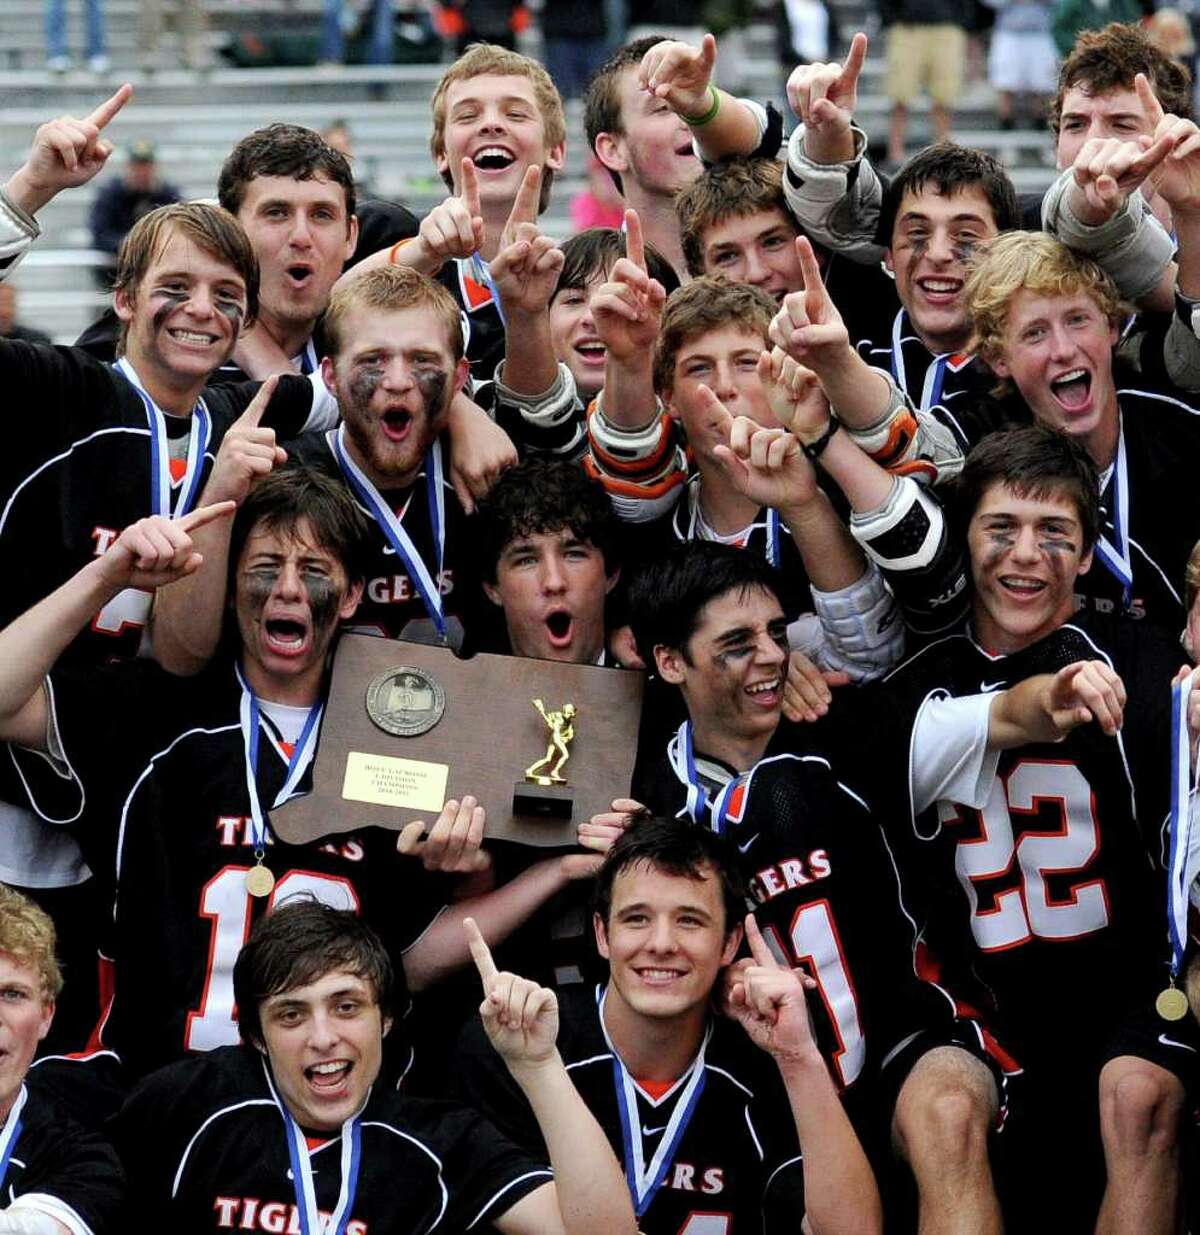 Ridgefield lacrosse players celebrate their win after Saturday's Division L final at Brien McMahon High School on June 11, 2011.